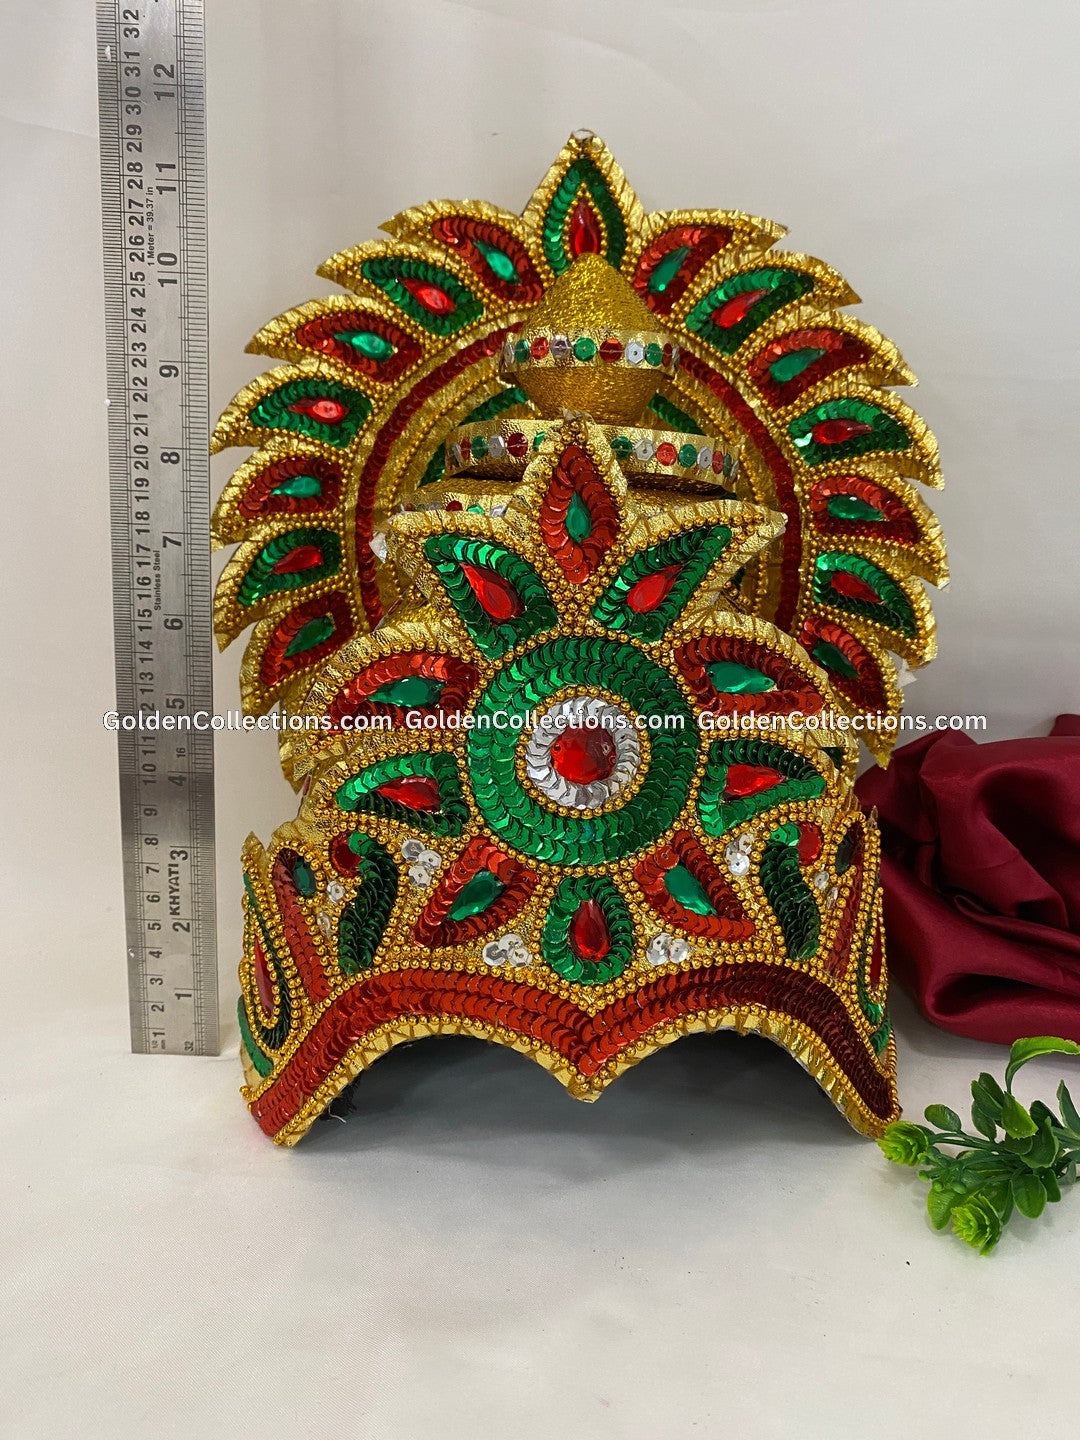 Crown Mukut for Indian Dance Drama - GoldenCollections DGC-1757 2